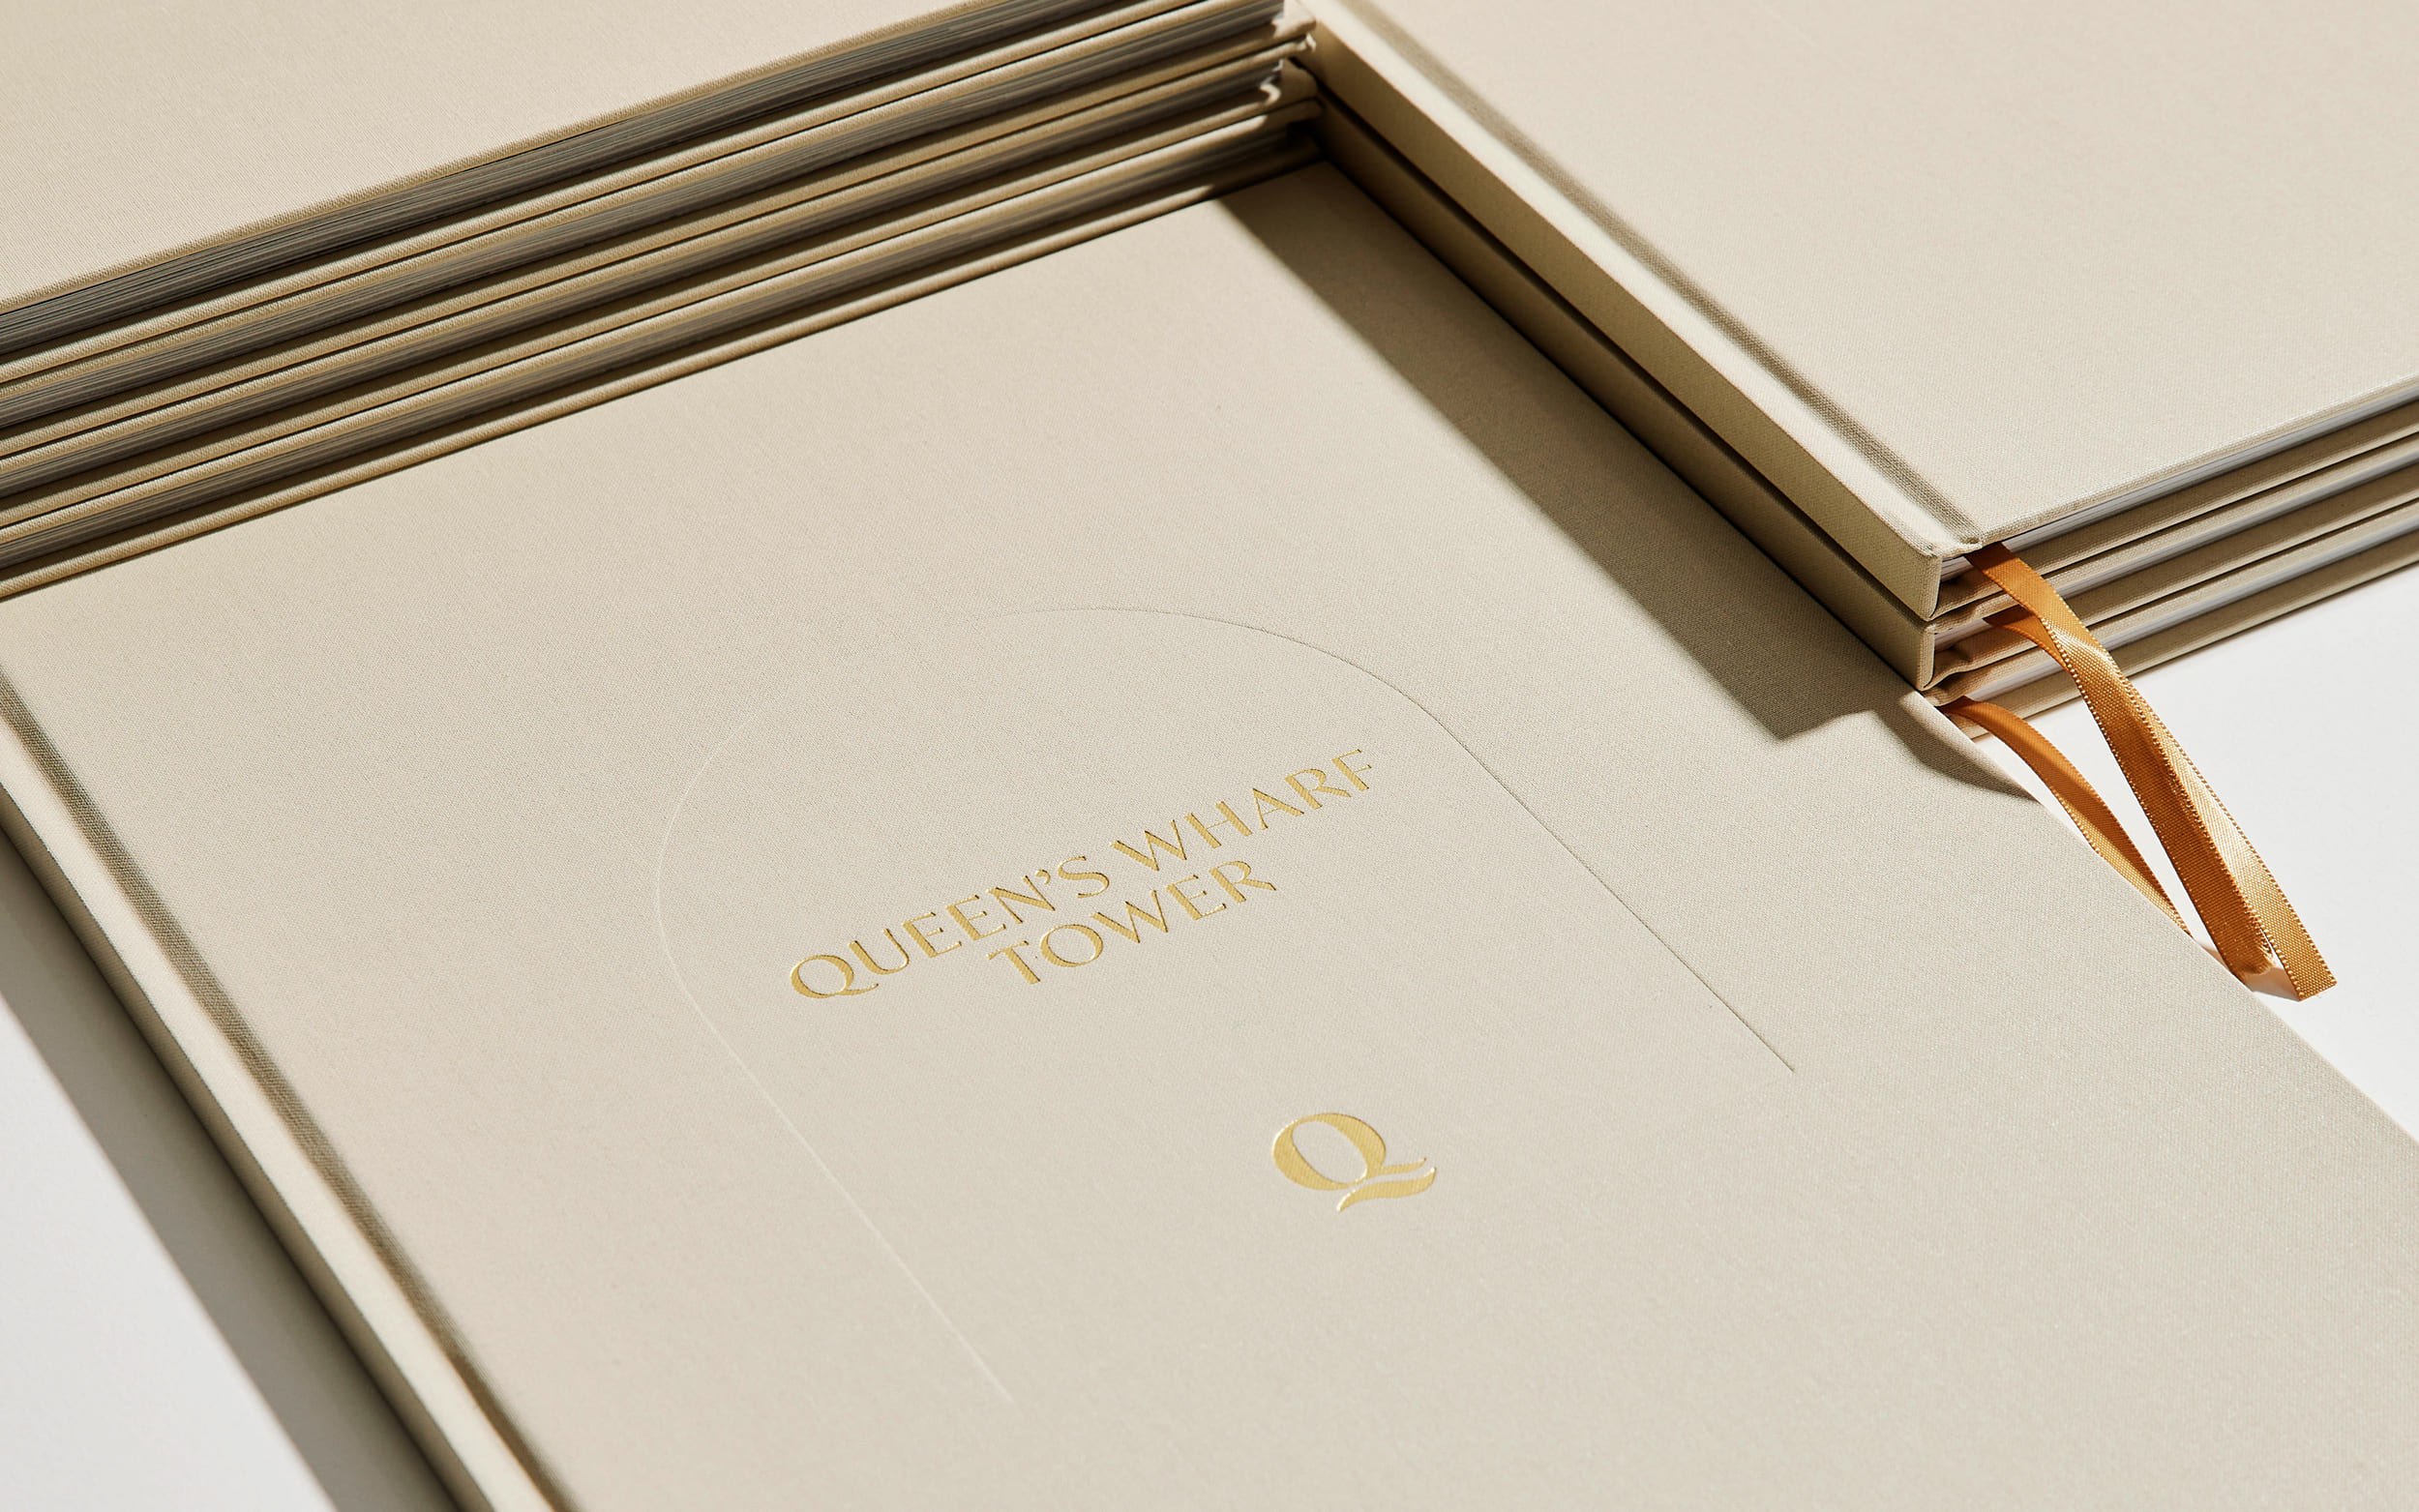 Queen's Wharf Tower brochure cover with gold foil and deboss